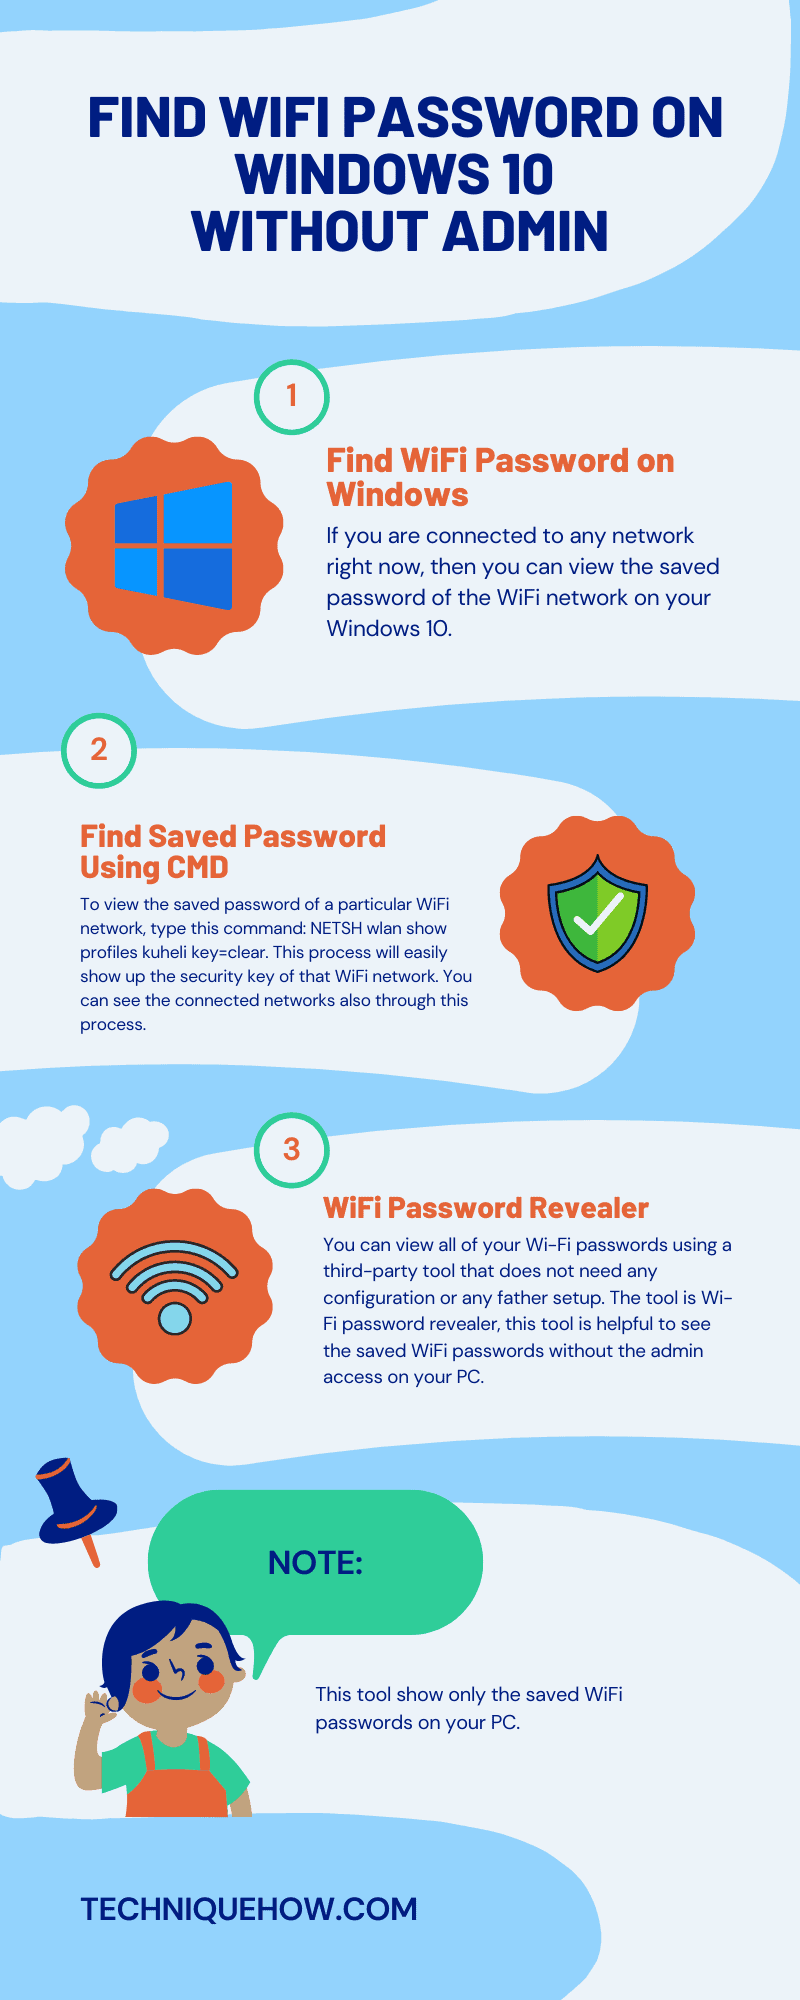 Infographic_Find WiFi Password on Windows